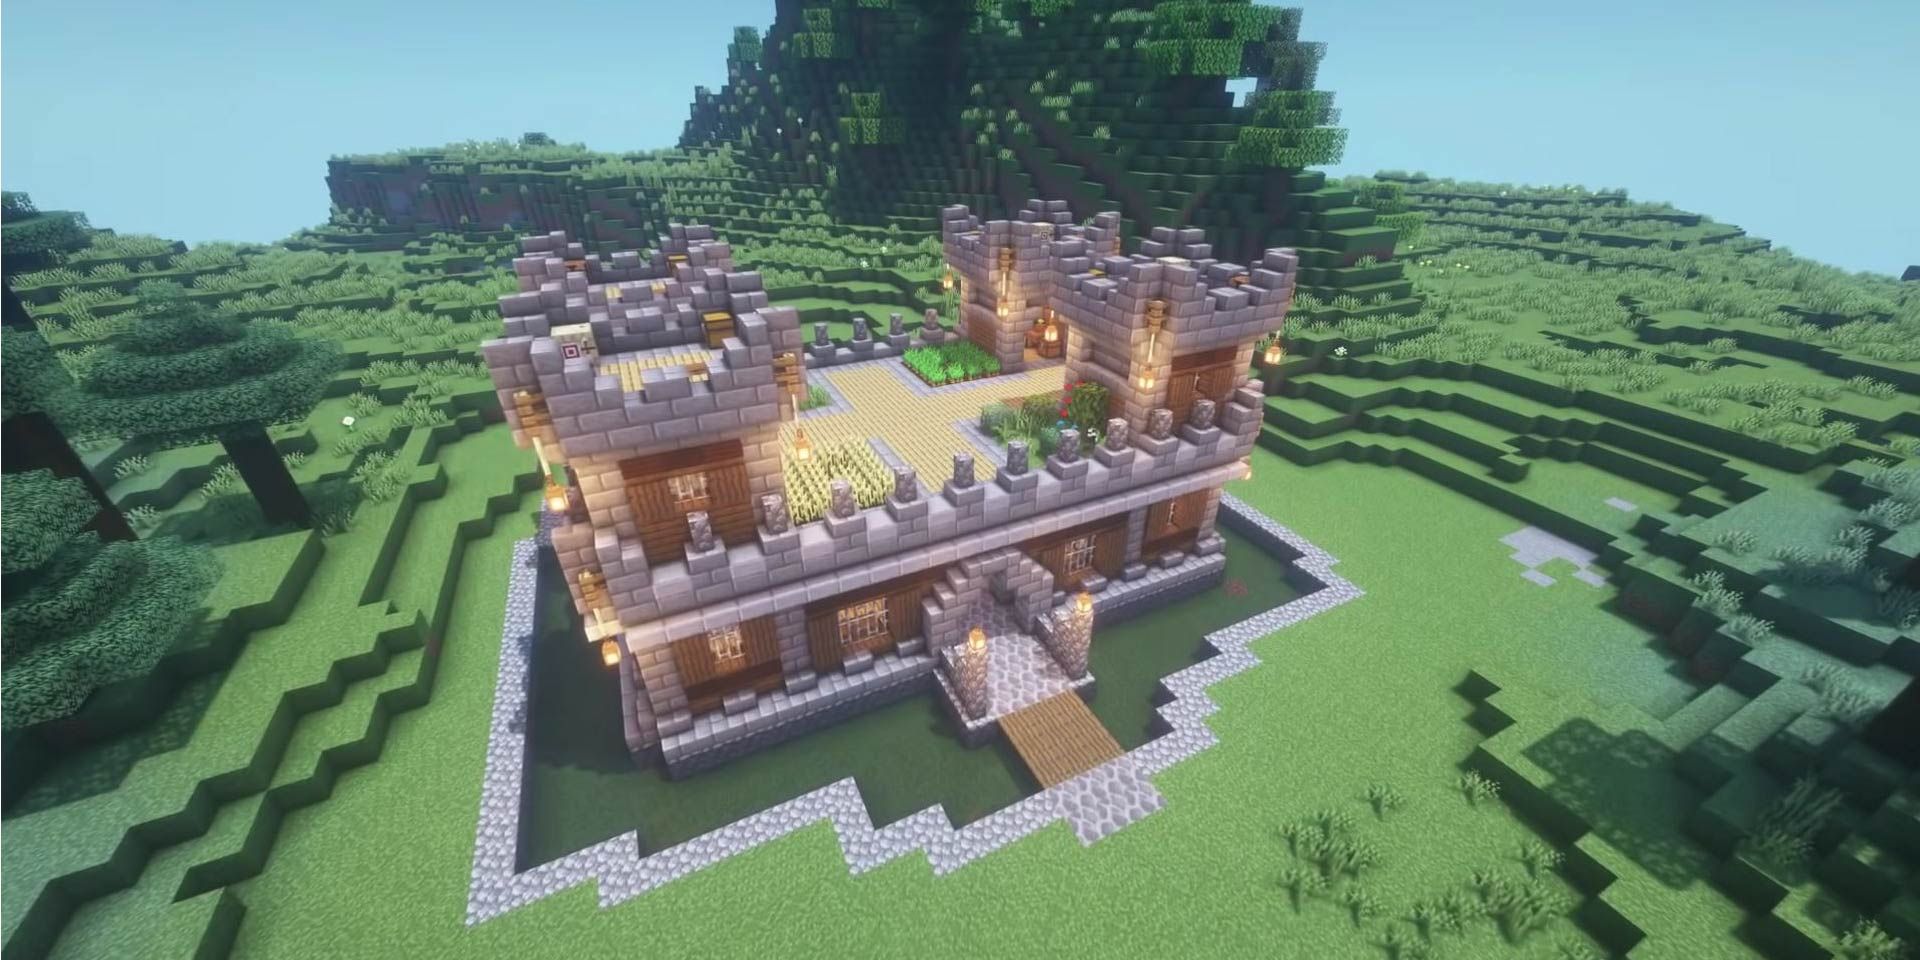 A relatively small but functional castle in a field in Minecraft.